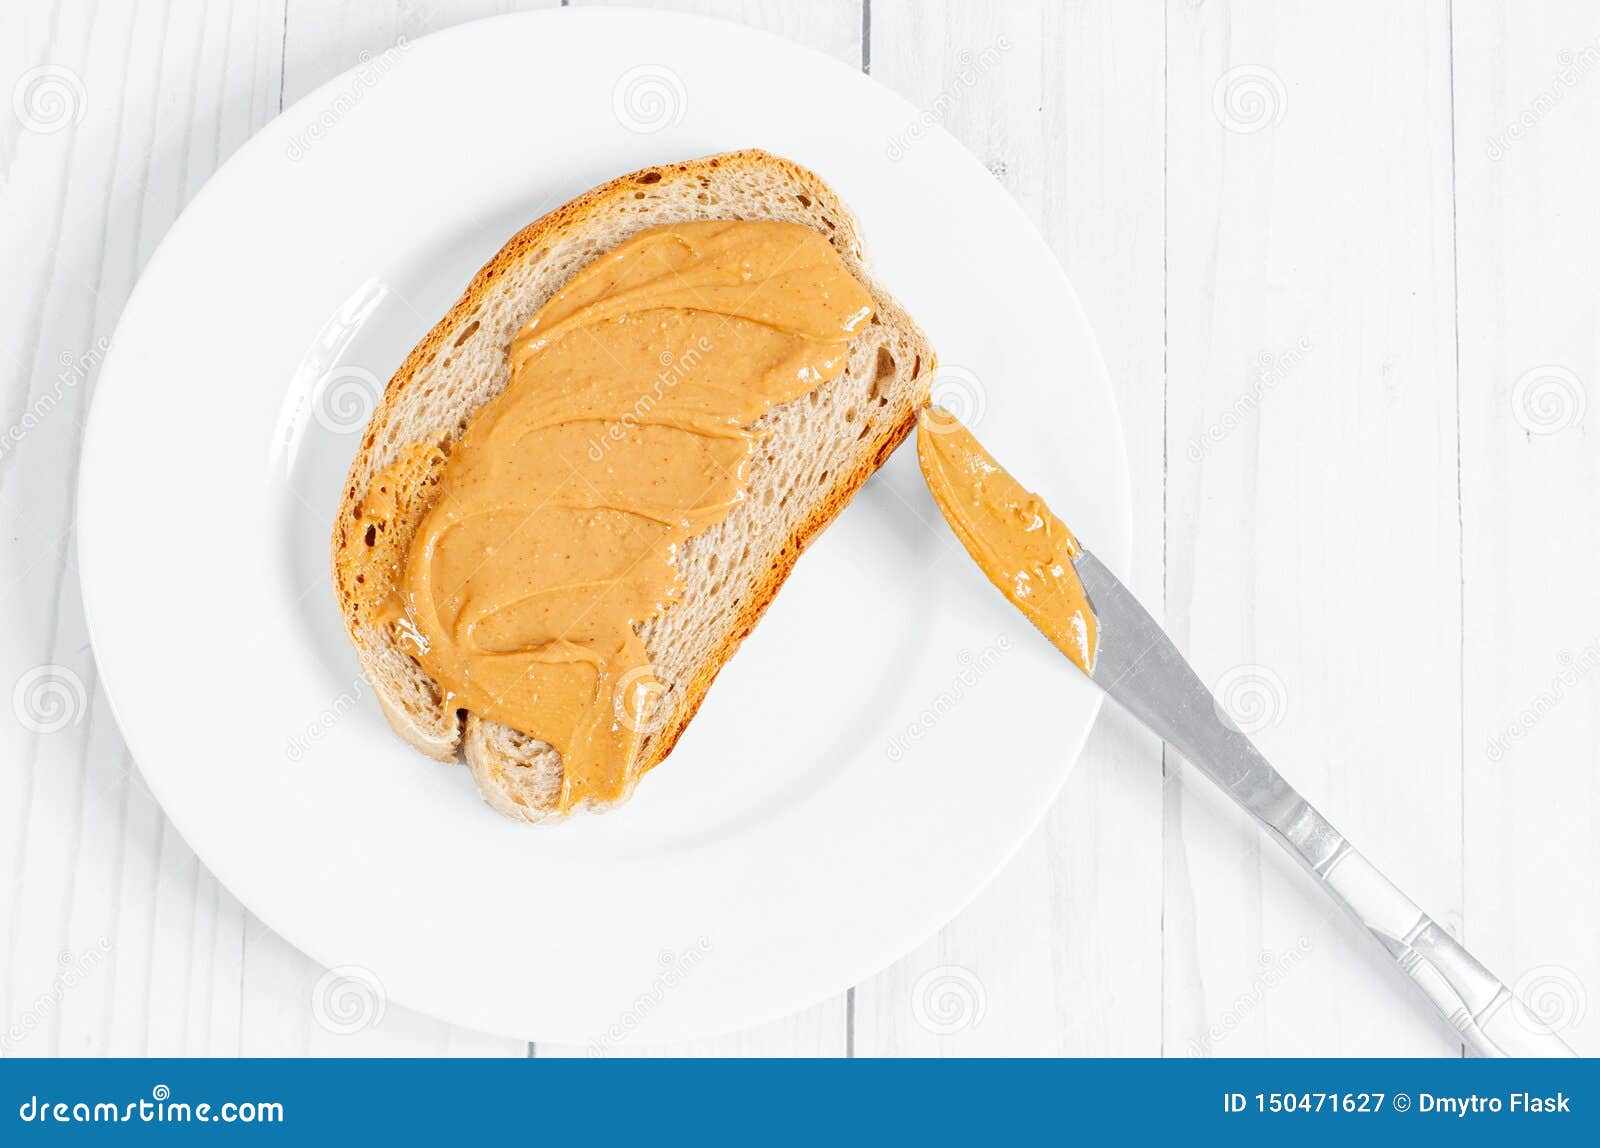 Peanut Butter Sandwiches Healthy Breakfast Bread With Peanut Butter Stock Image Image Of Delicious Calorie